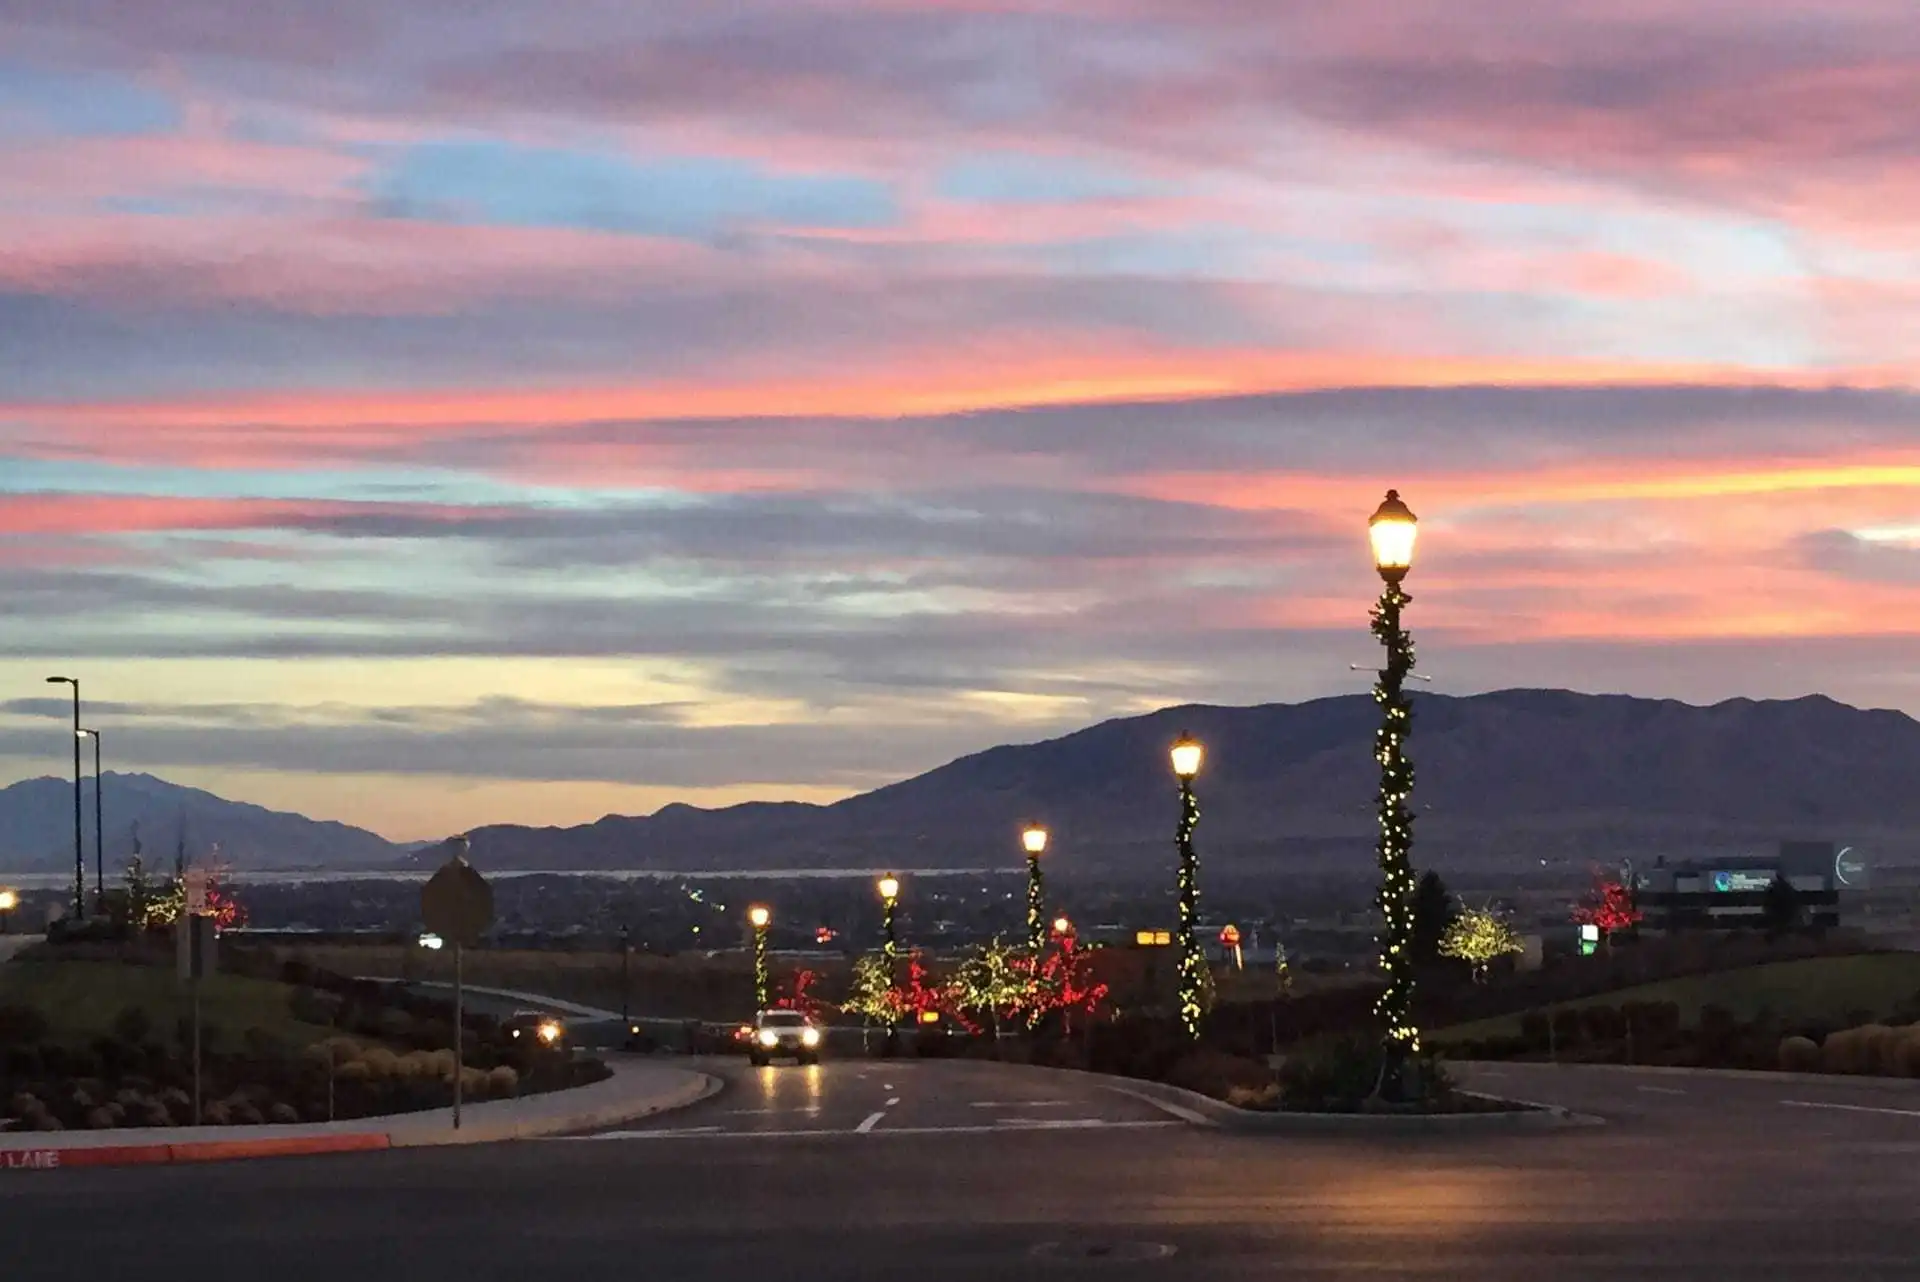 Sunset of Salt Lake valley with Christmas lights on the light poles